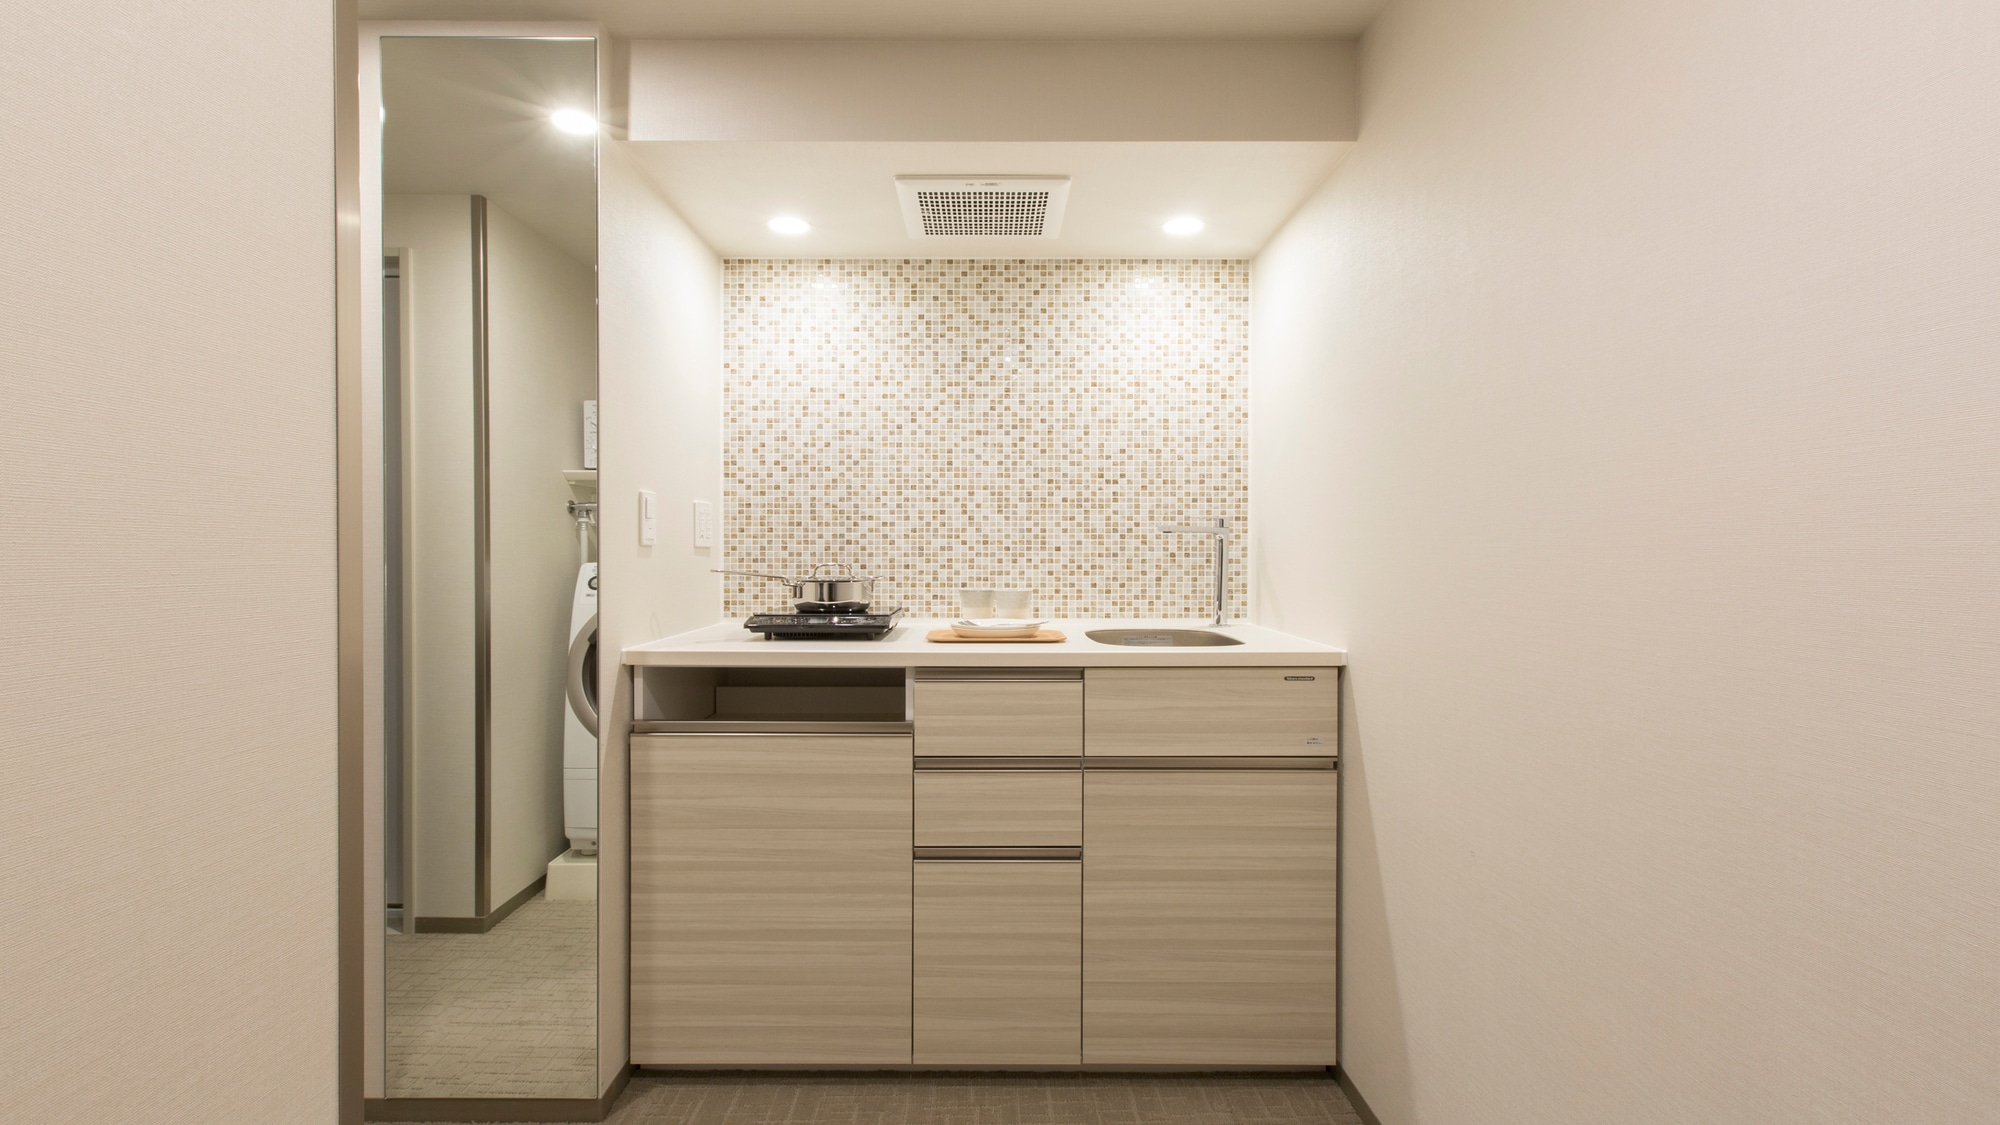 Residential double / 25㎡ with kitchenette, washer / dryer, and microwave